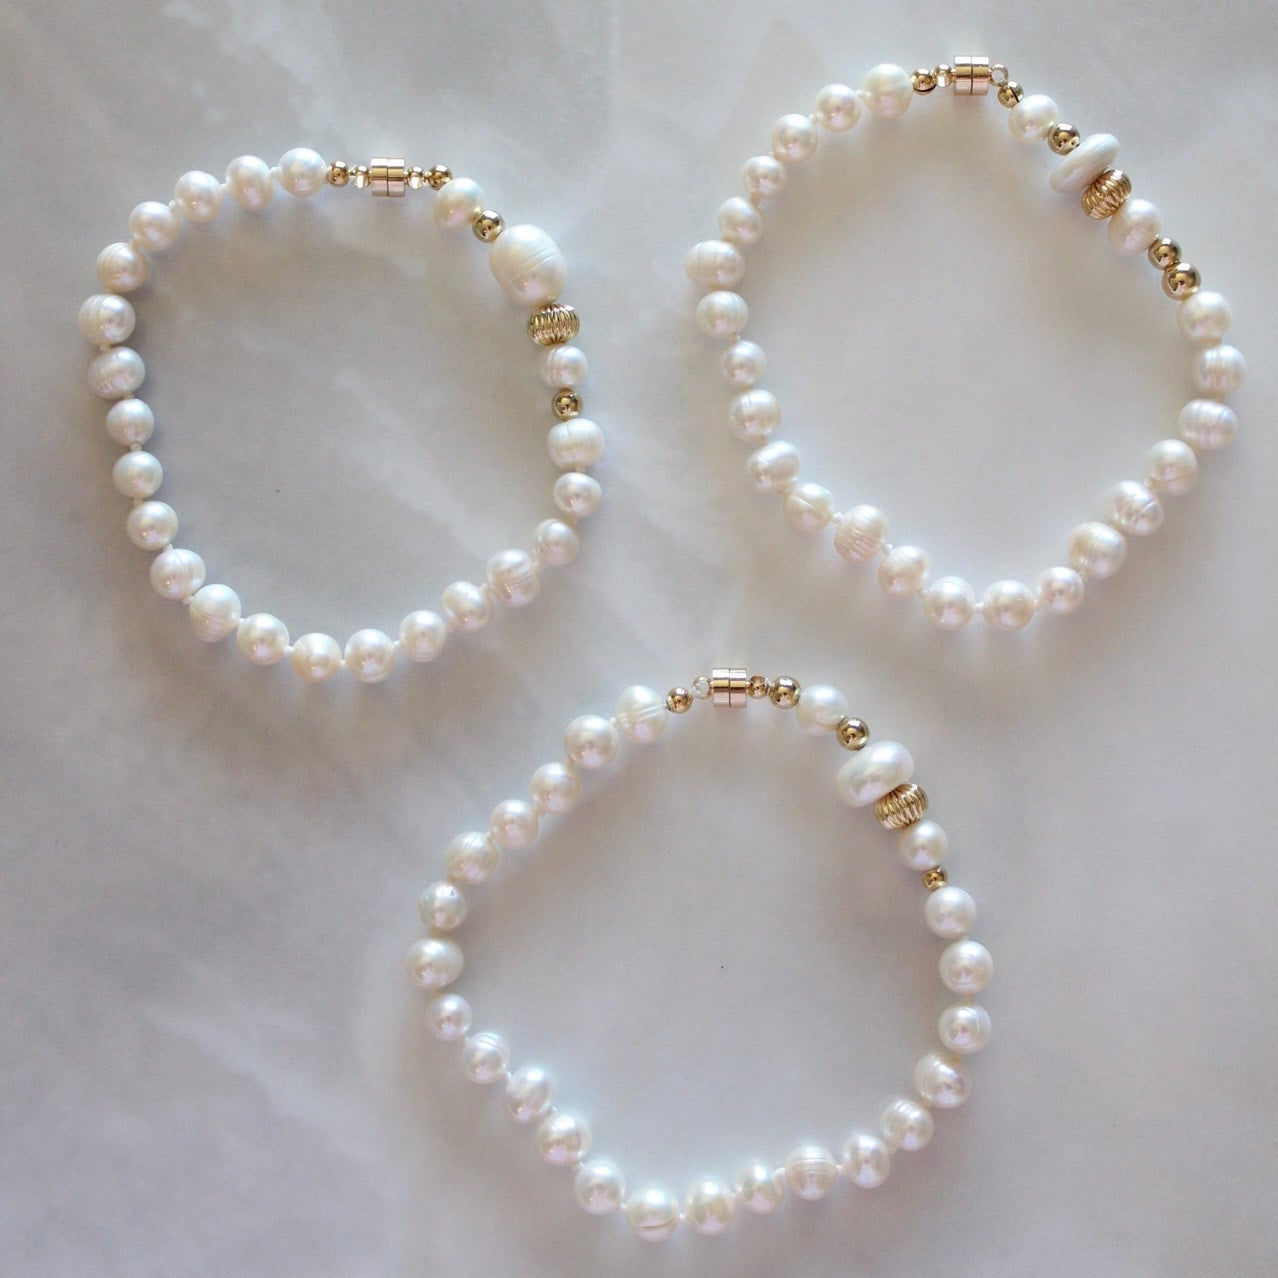 New Age FSG - We are excited with the latest Freshwater Pearl bracelet  designs from our designer's desk! A pretty and fun take on this timeless  classic. Stack them up with your